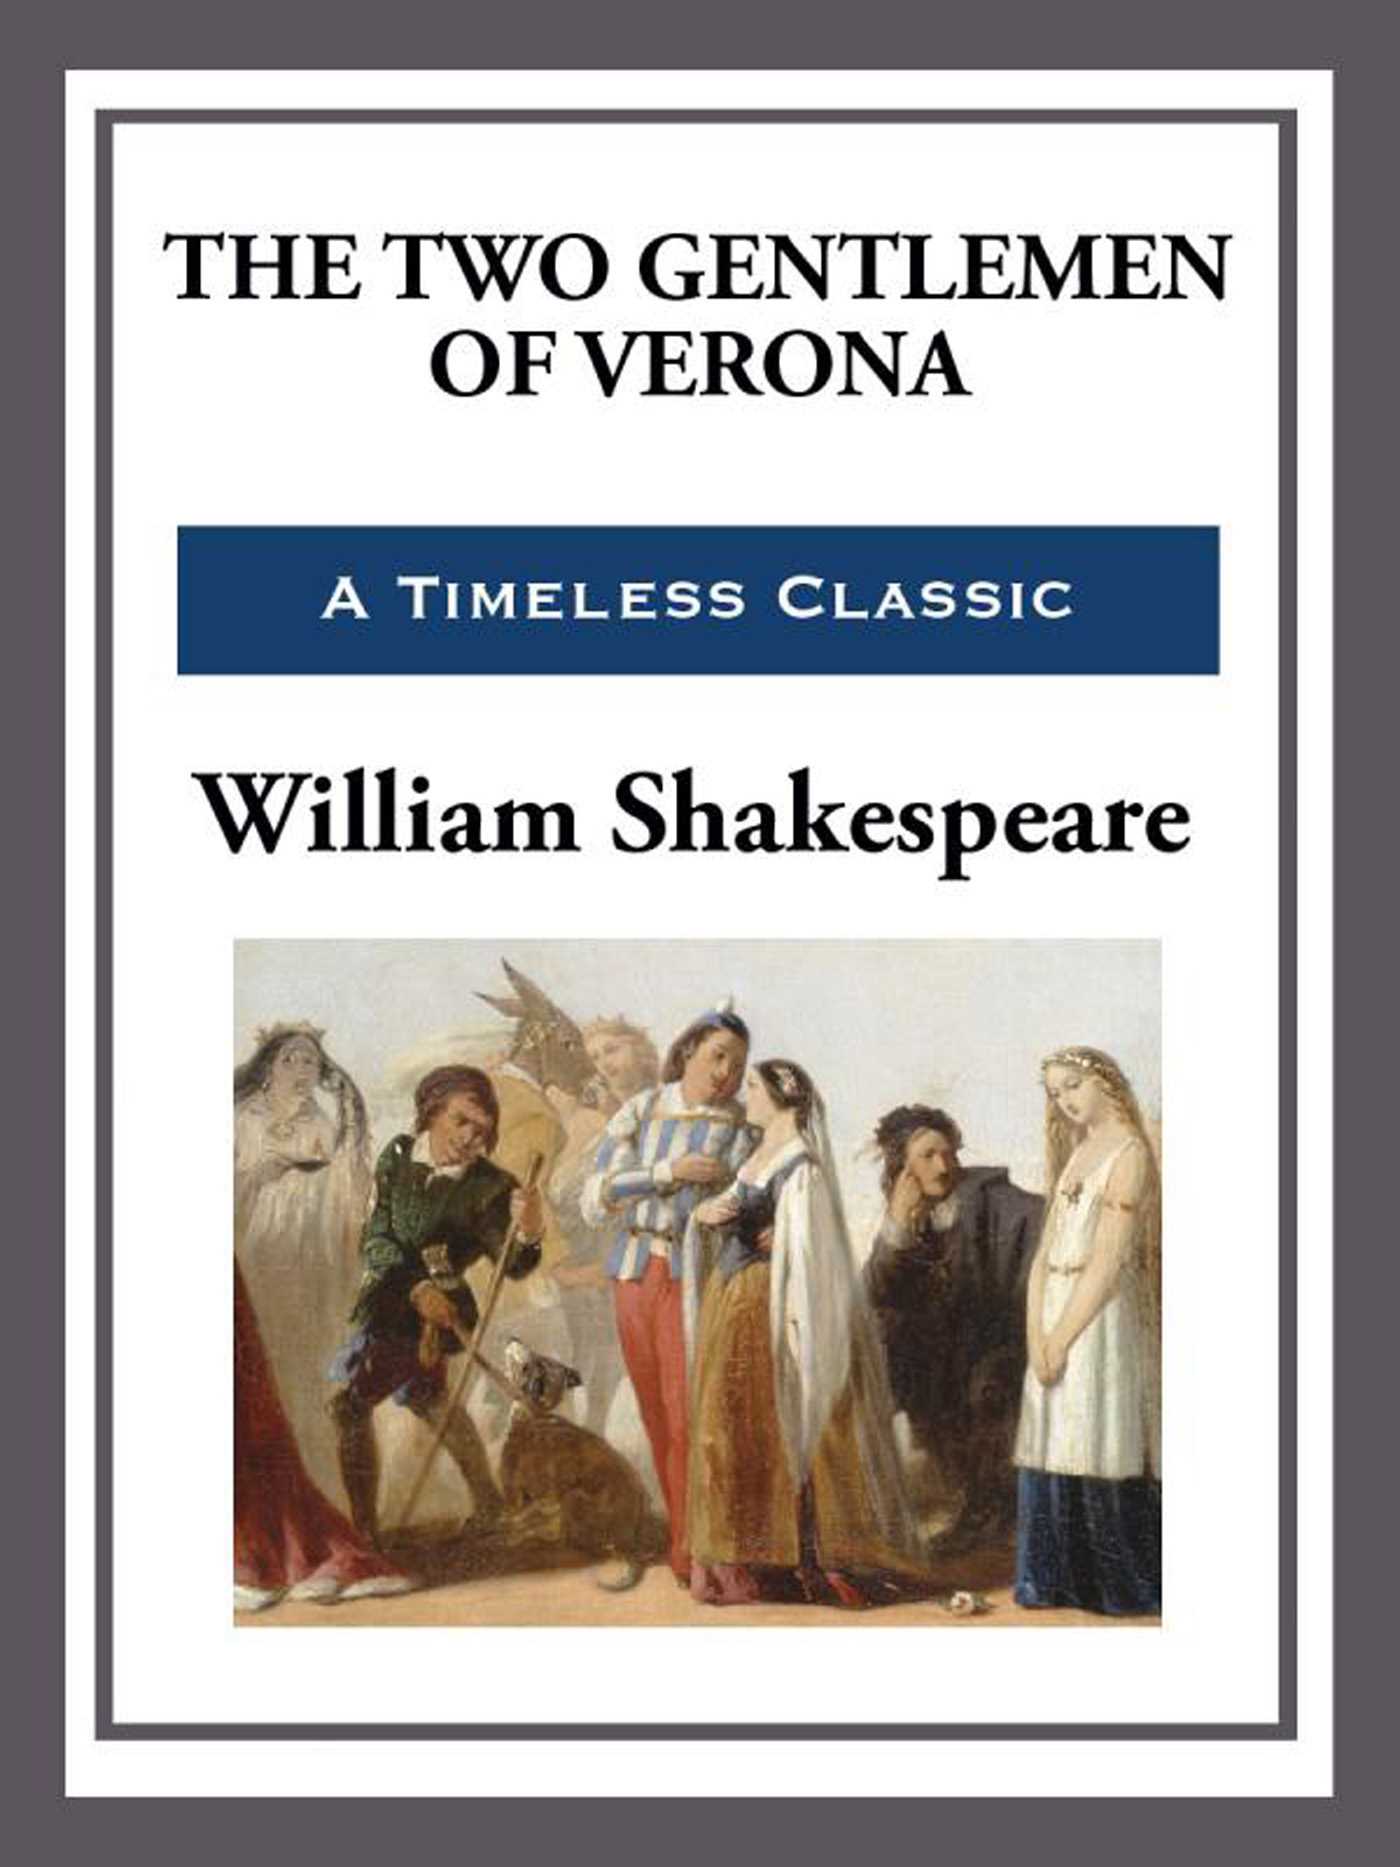 Image of the book cover The Two Gentlemen of Verona by William Shakespeare featuring a painted image of gentlemen and ladies of the day. 